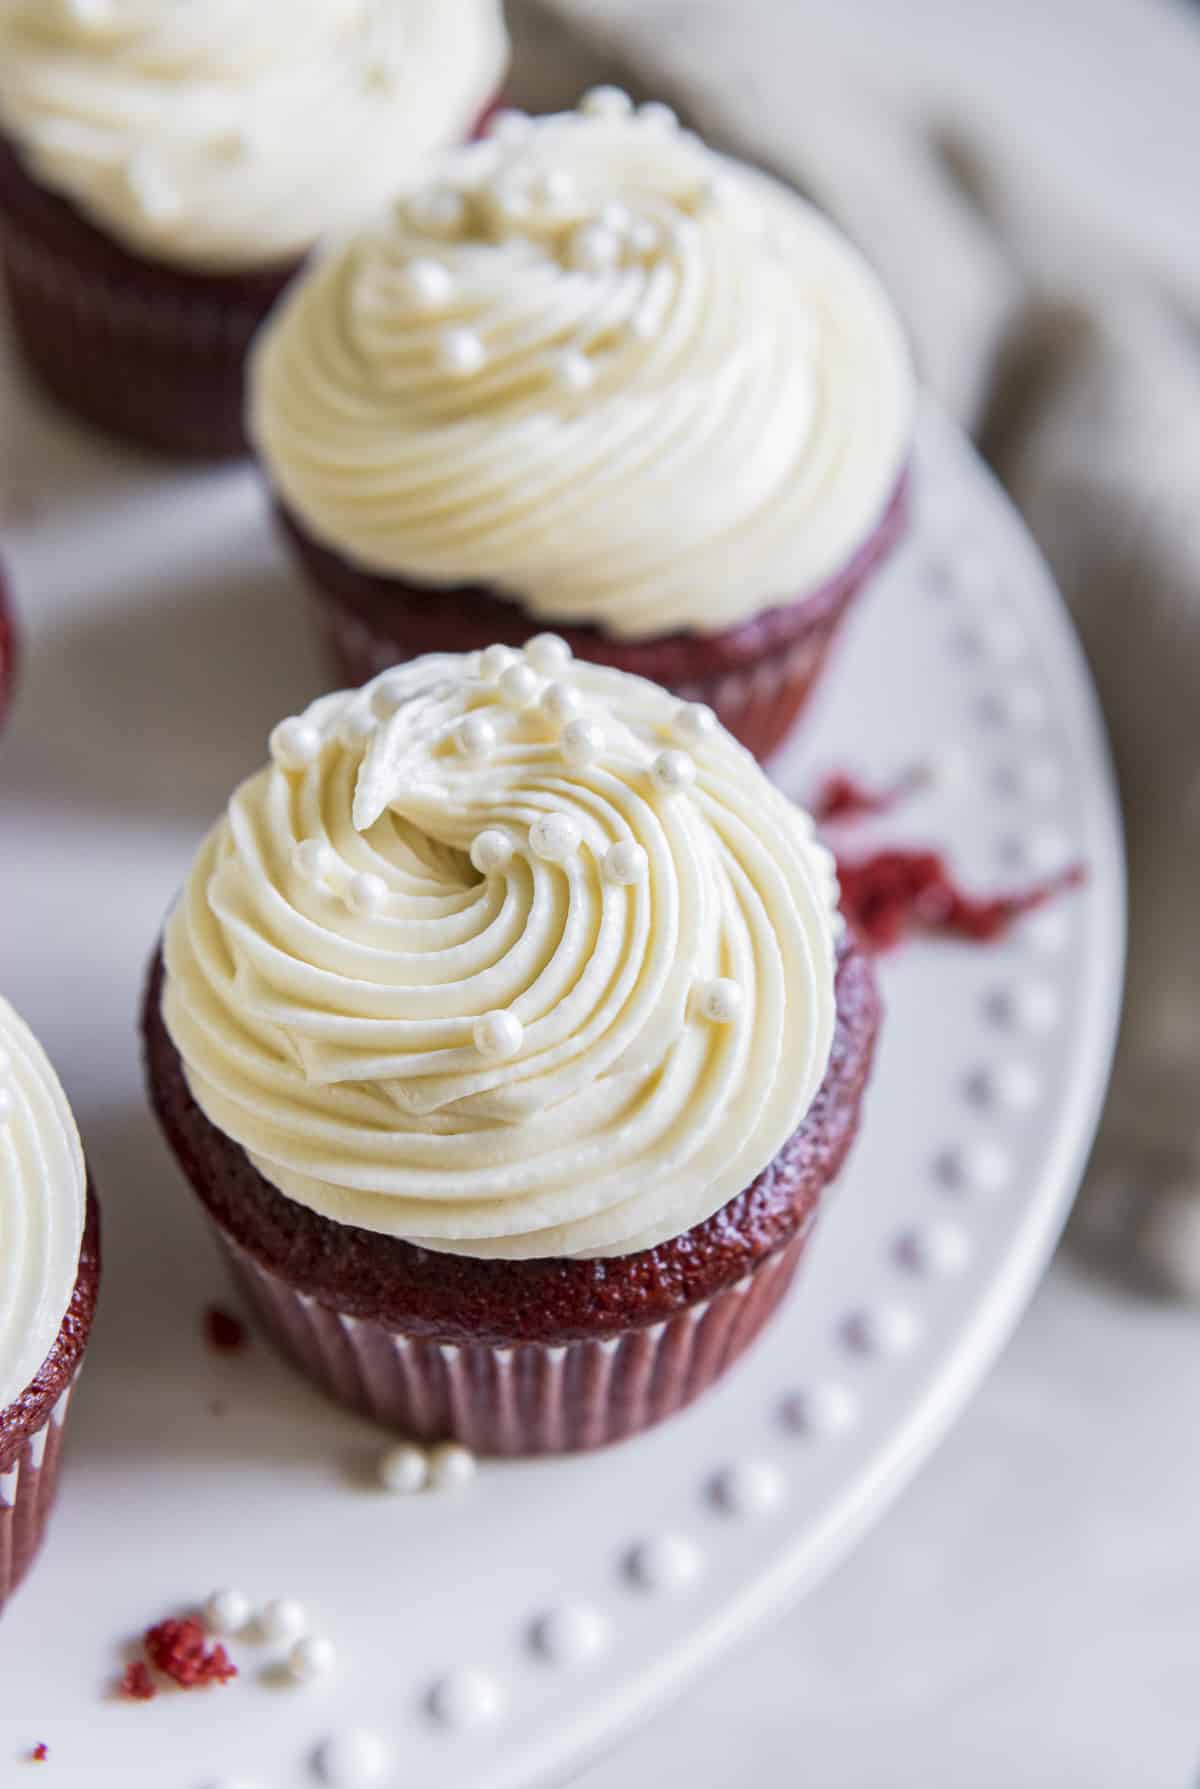 red velvet cupcakes topped with cream cheese frosting on a cake stand